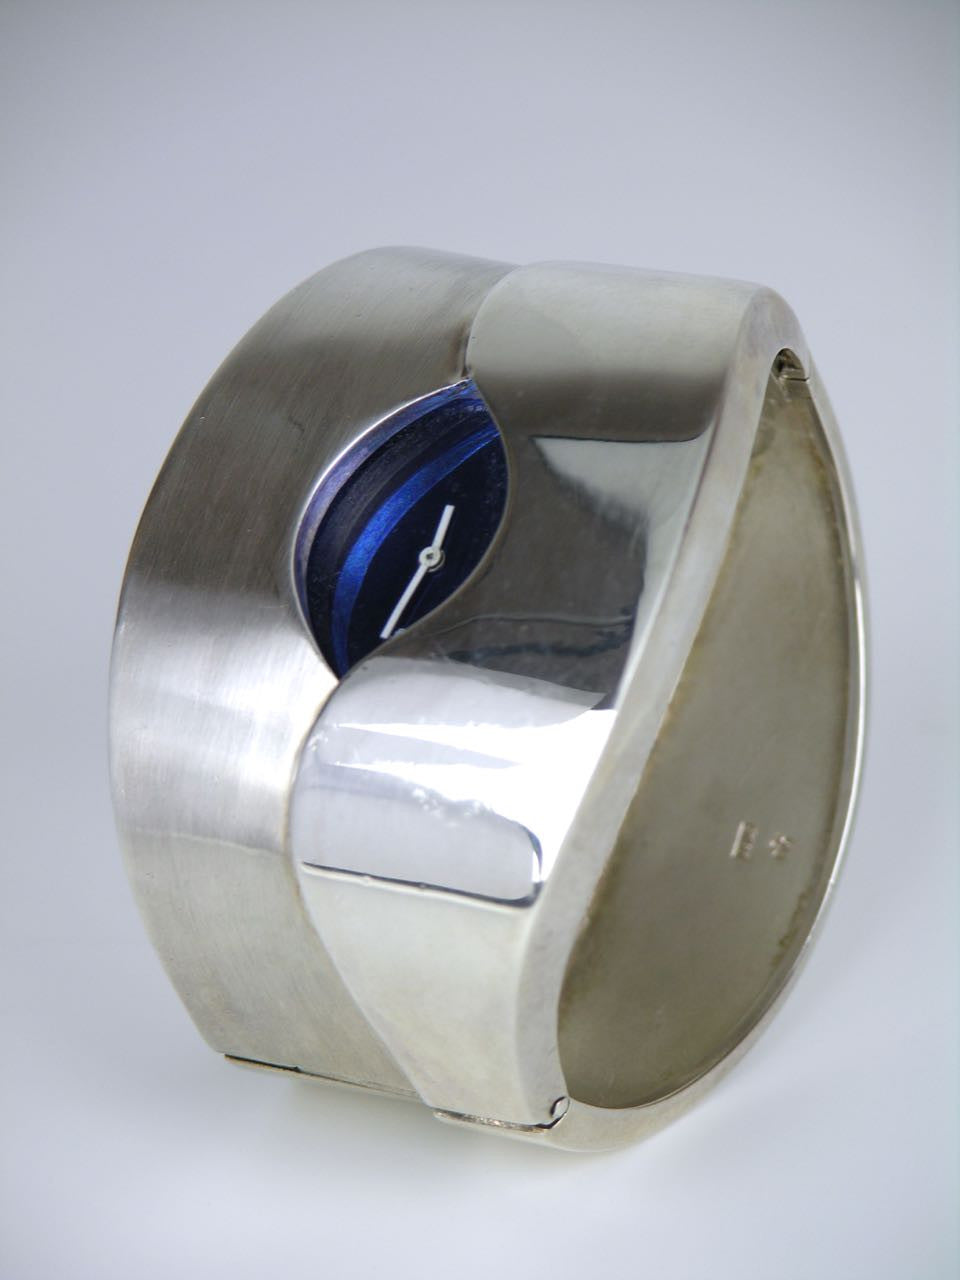 Heavy modernist silver hinged cuff watch by Relo of Austria